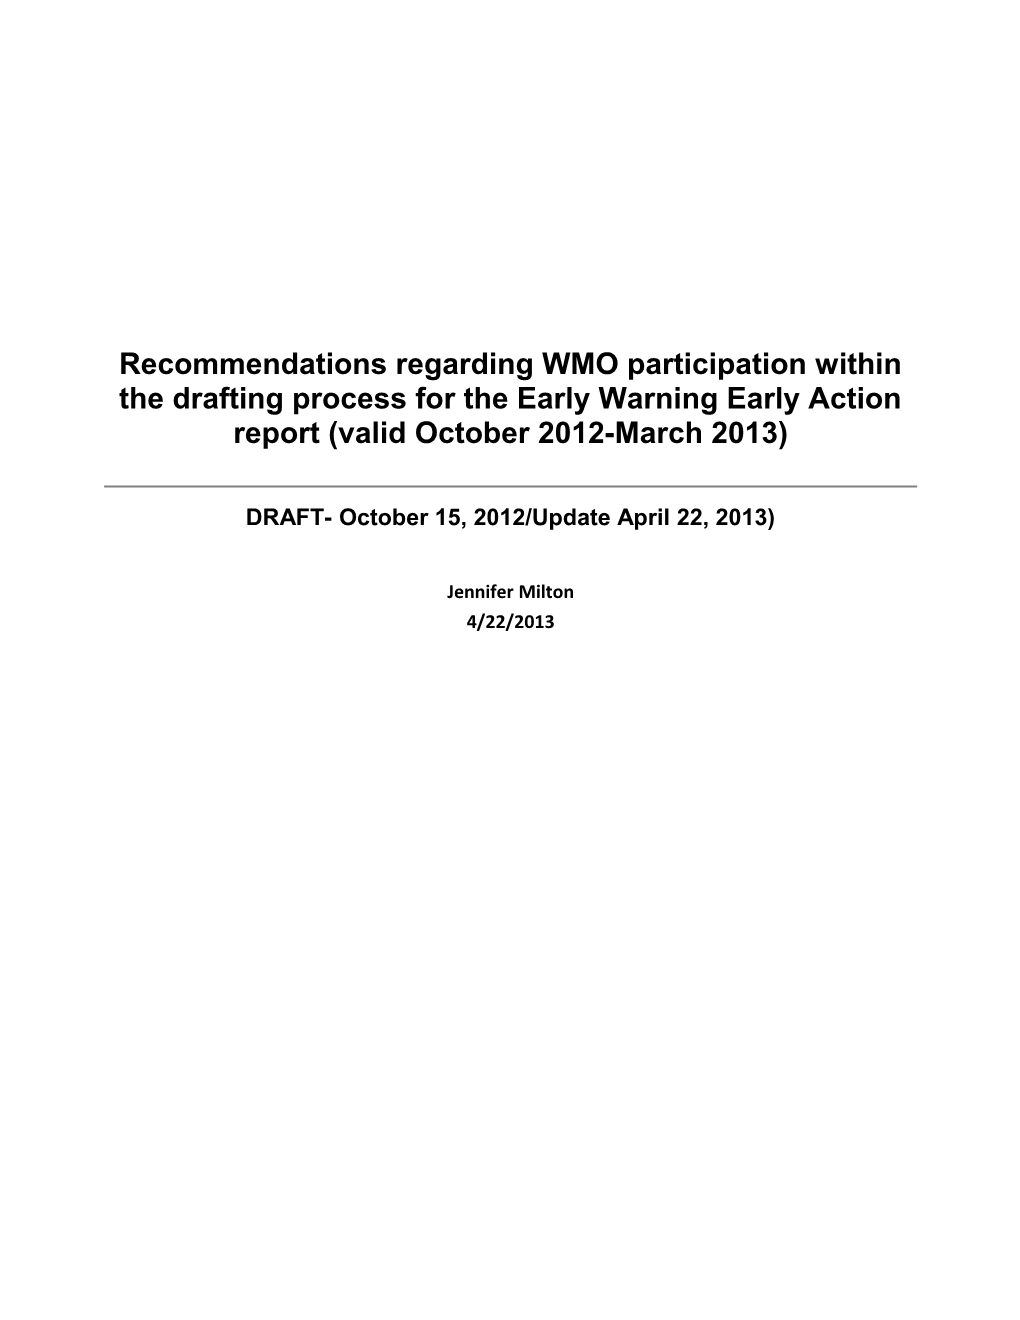 Recommendations Regarding WMO Participation Within the Drafting Process for the Early Warning